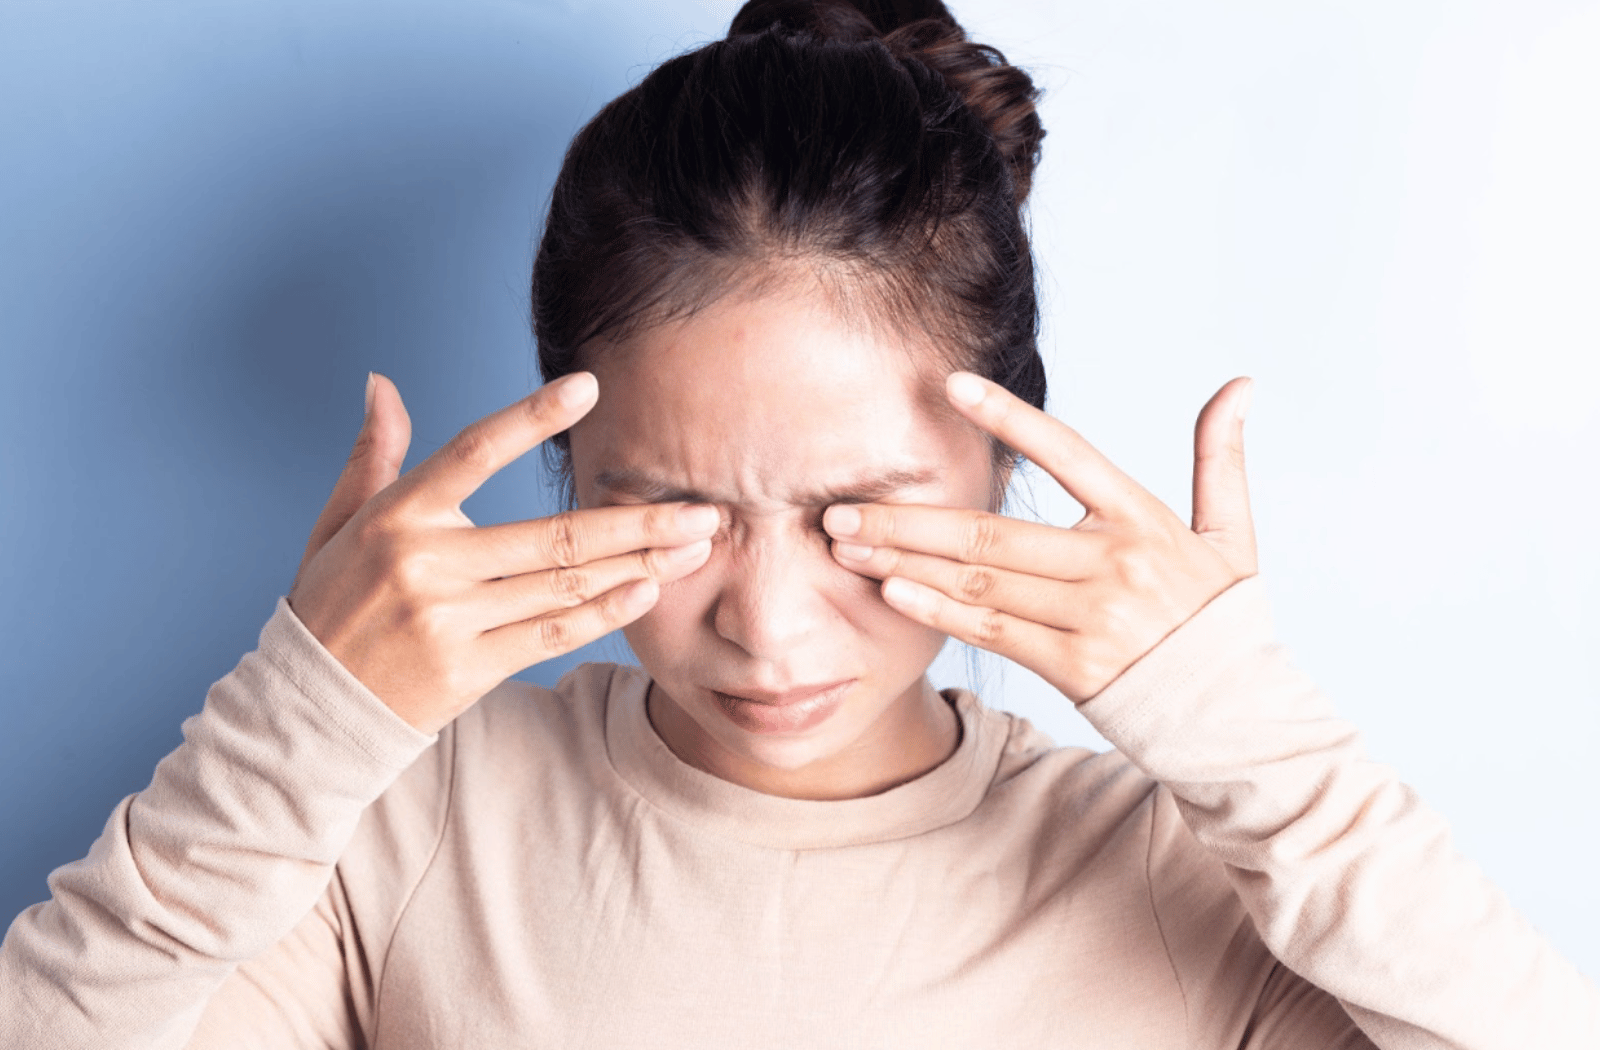 A young woman rubbing her eyes in frustration due to dry eye syndrome.